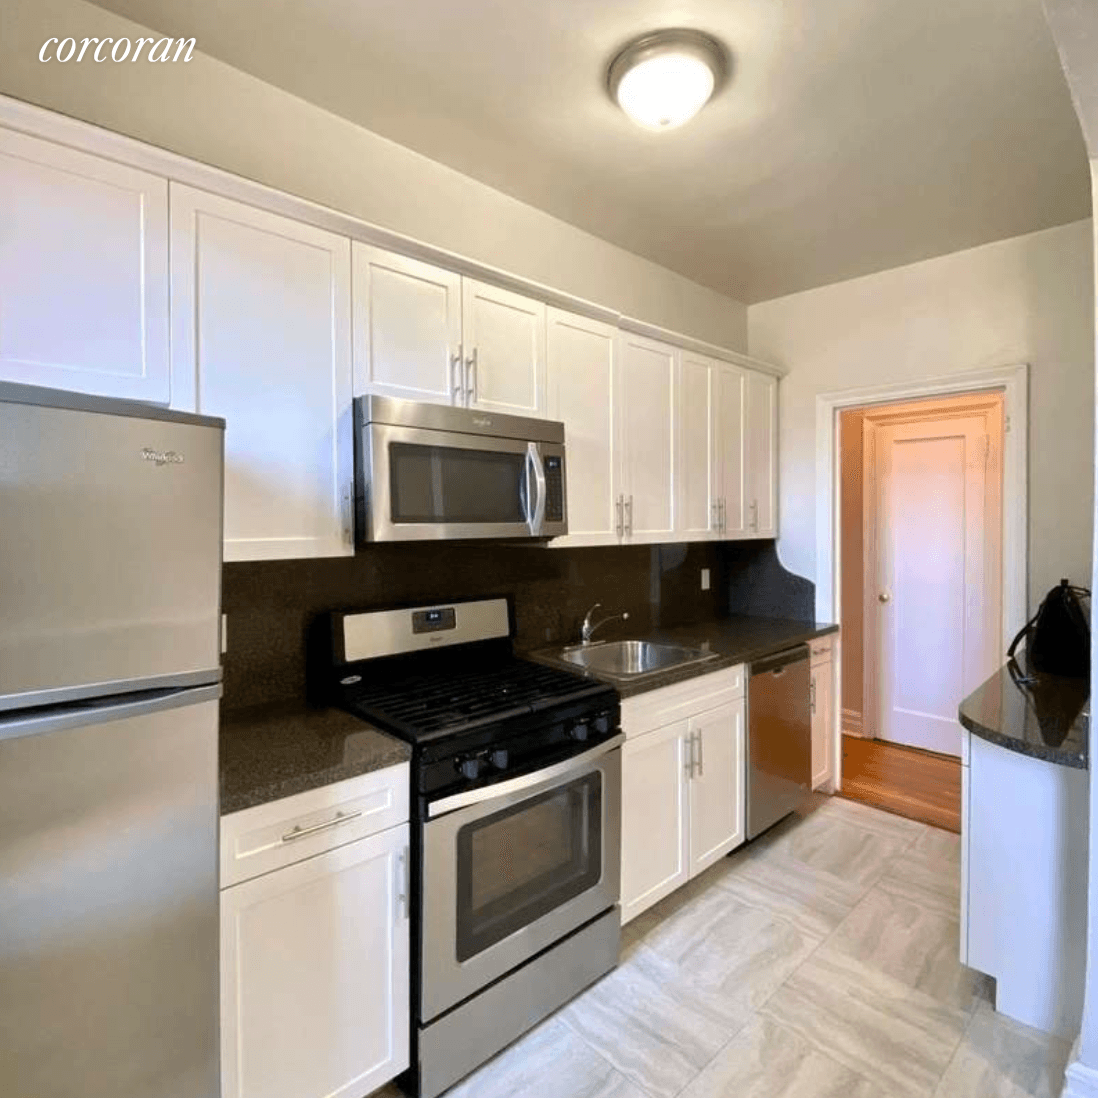 One of the very best buildings in Windsor Terrace, right by beautiful Prospect Park and Subway Huge RENOVATED 1000 sq ft 2 bed !